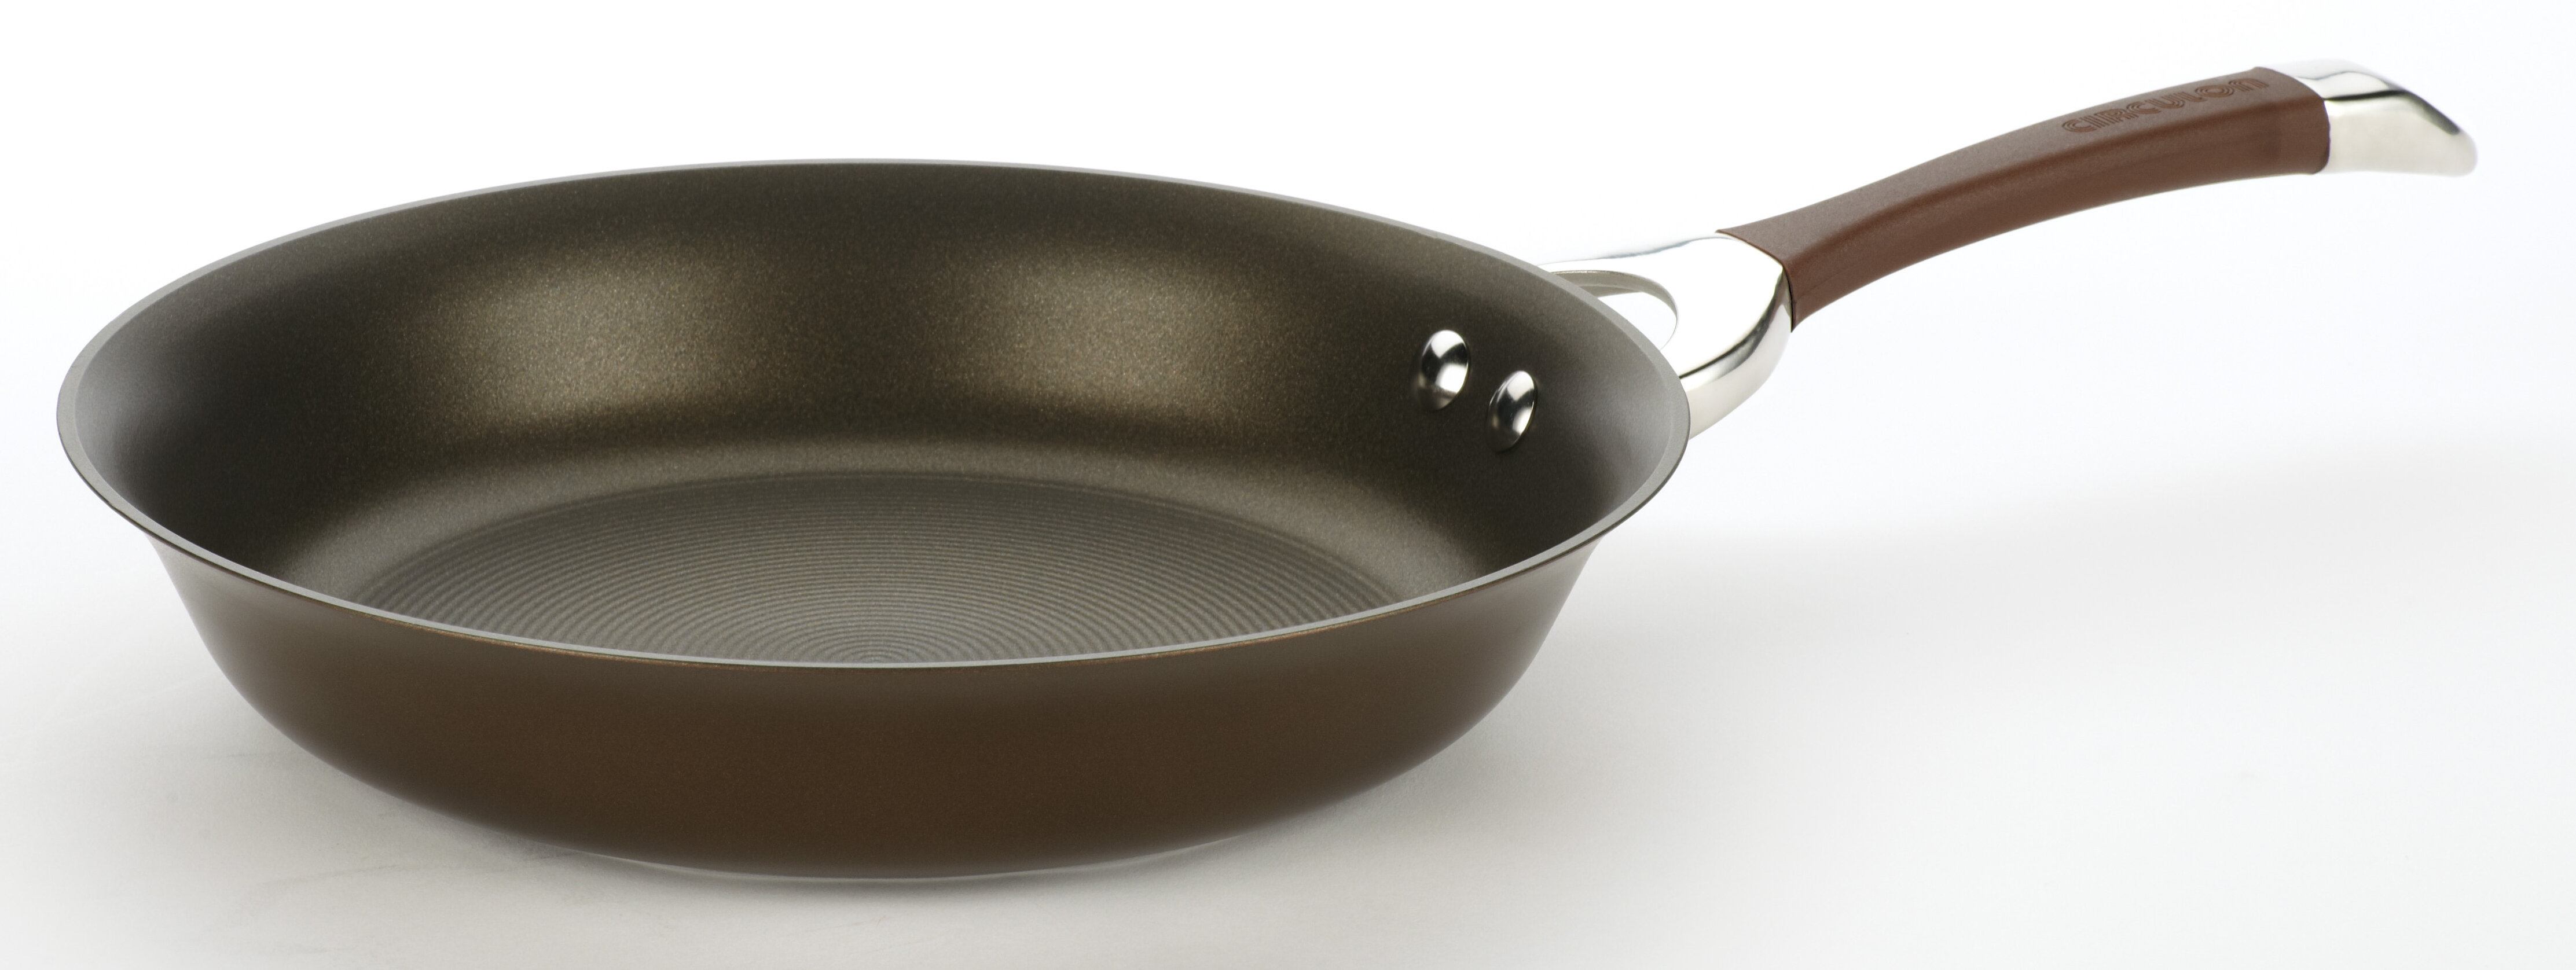 Circulon Radiance Hard Anodized Nonstick Frying Pan / Skillet with